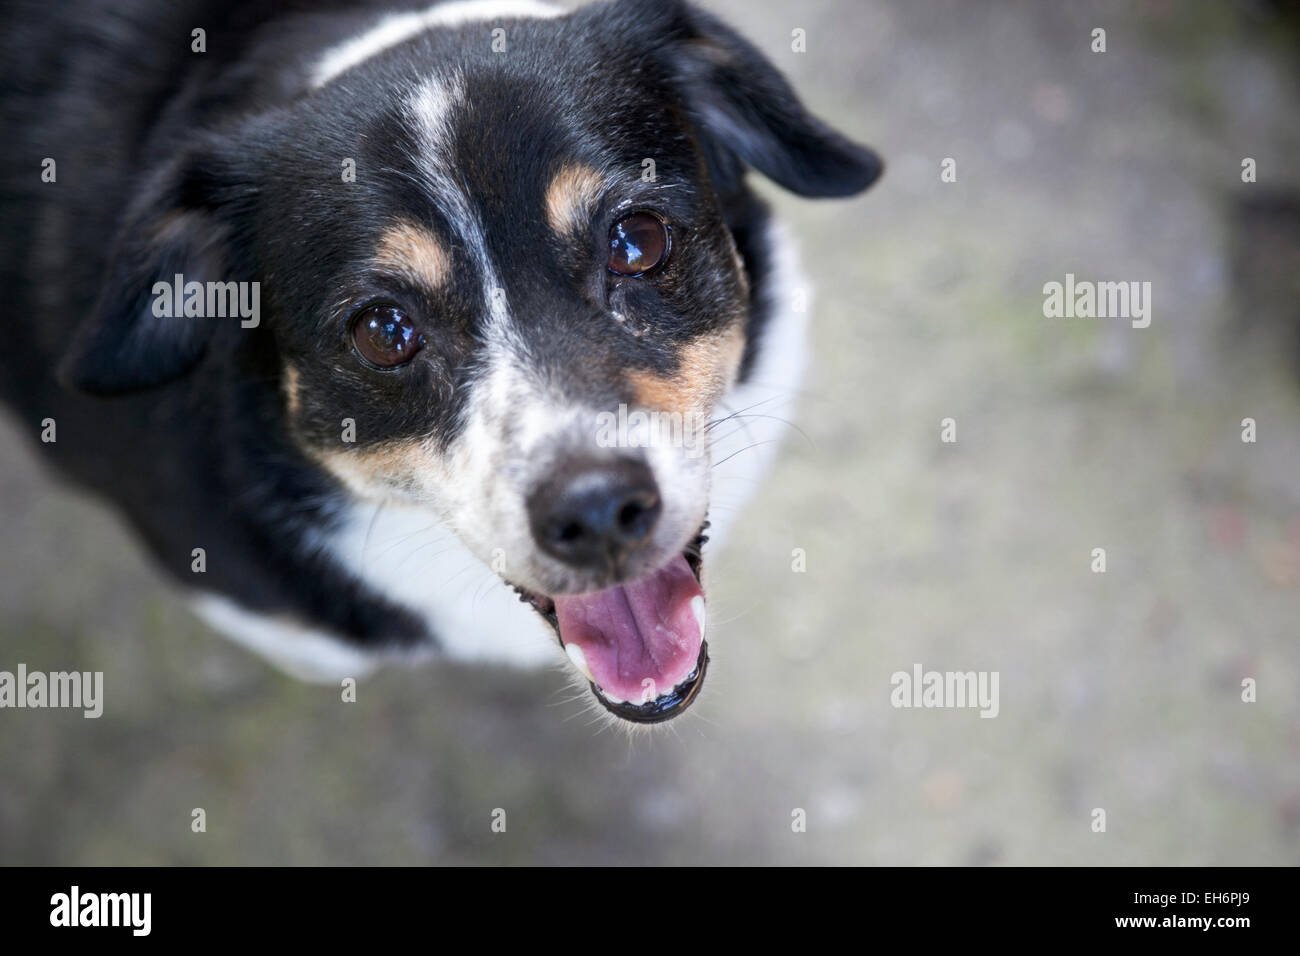 A hopeful mutt looking into the camera Stock Photo